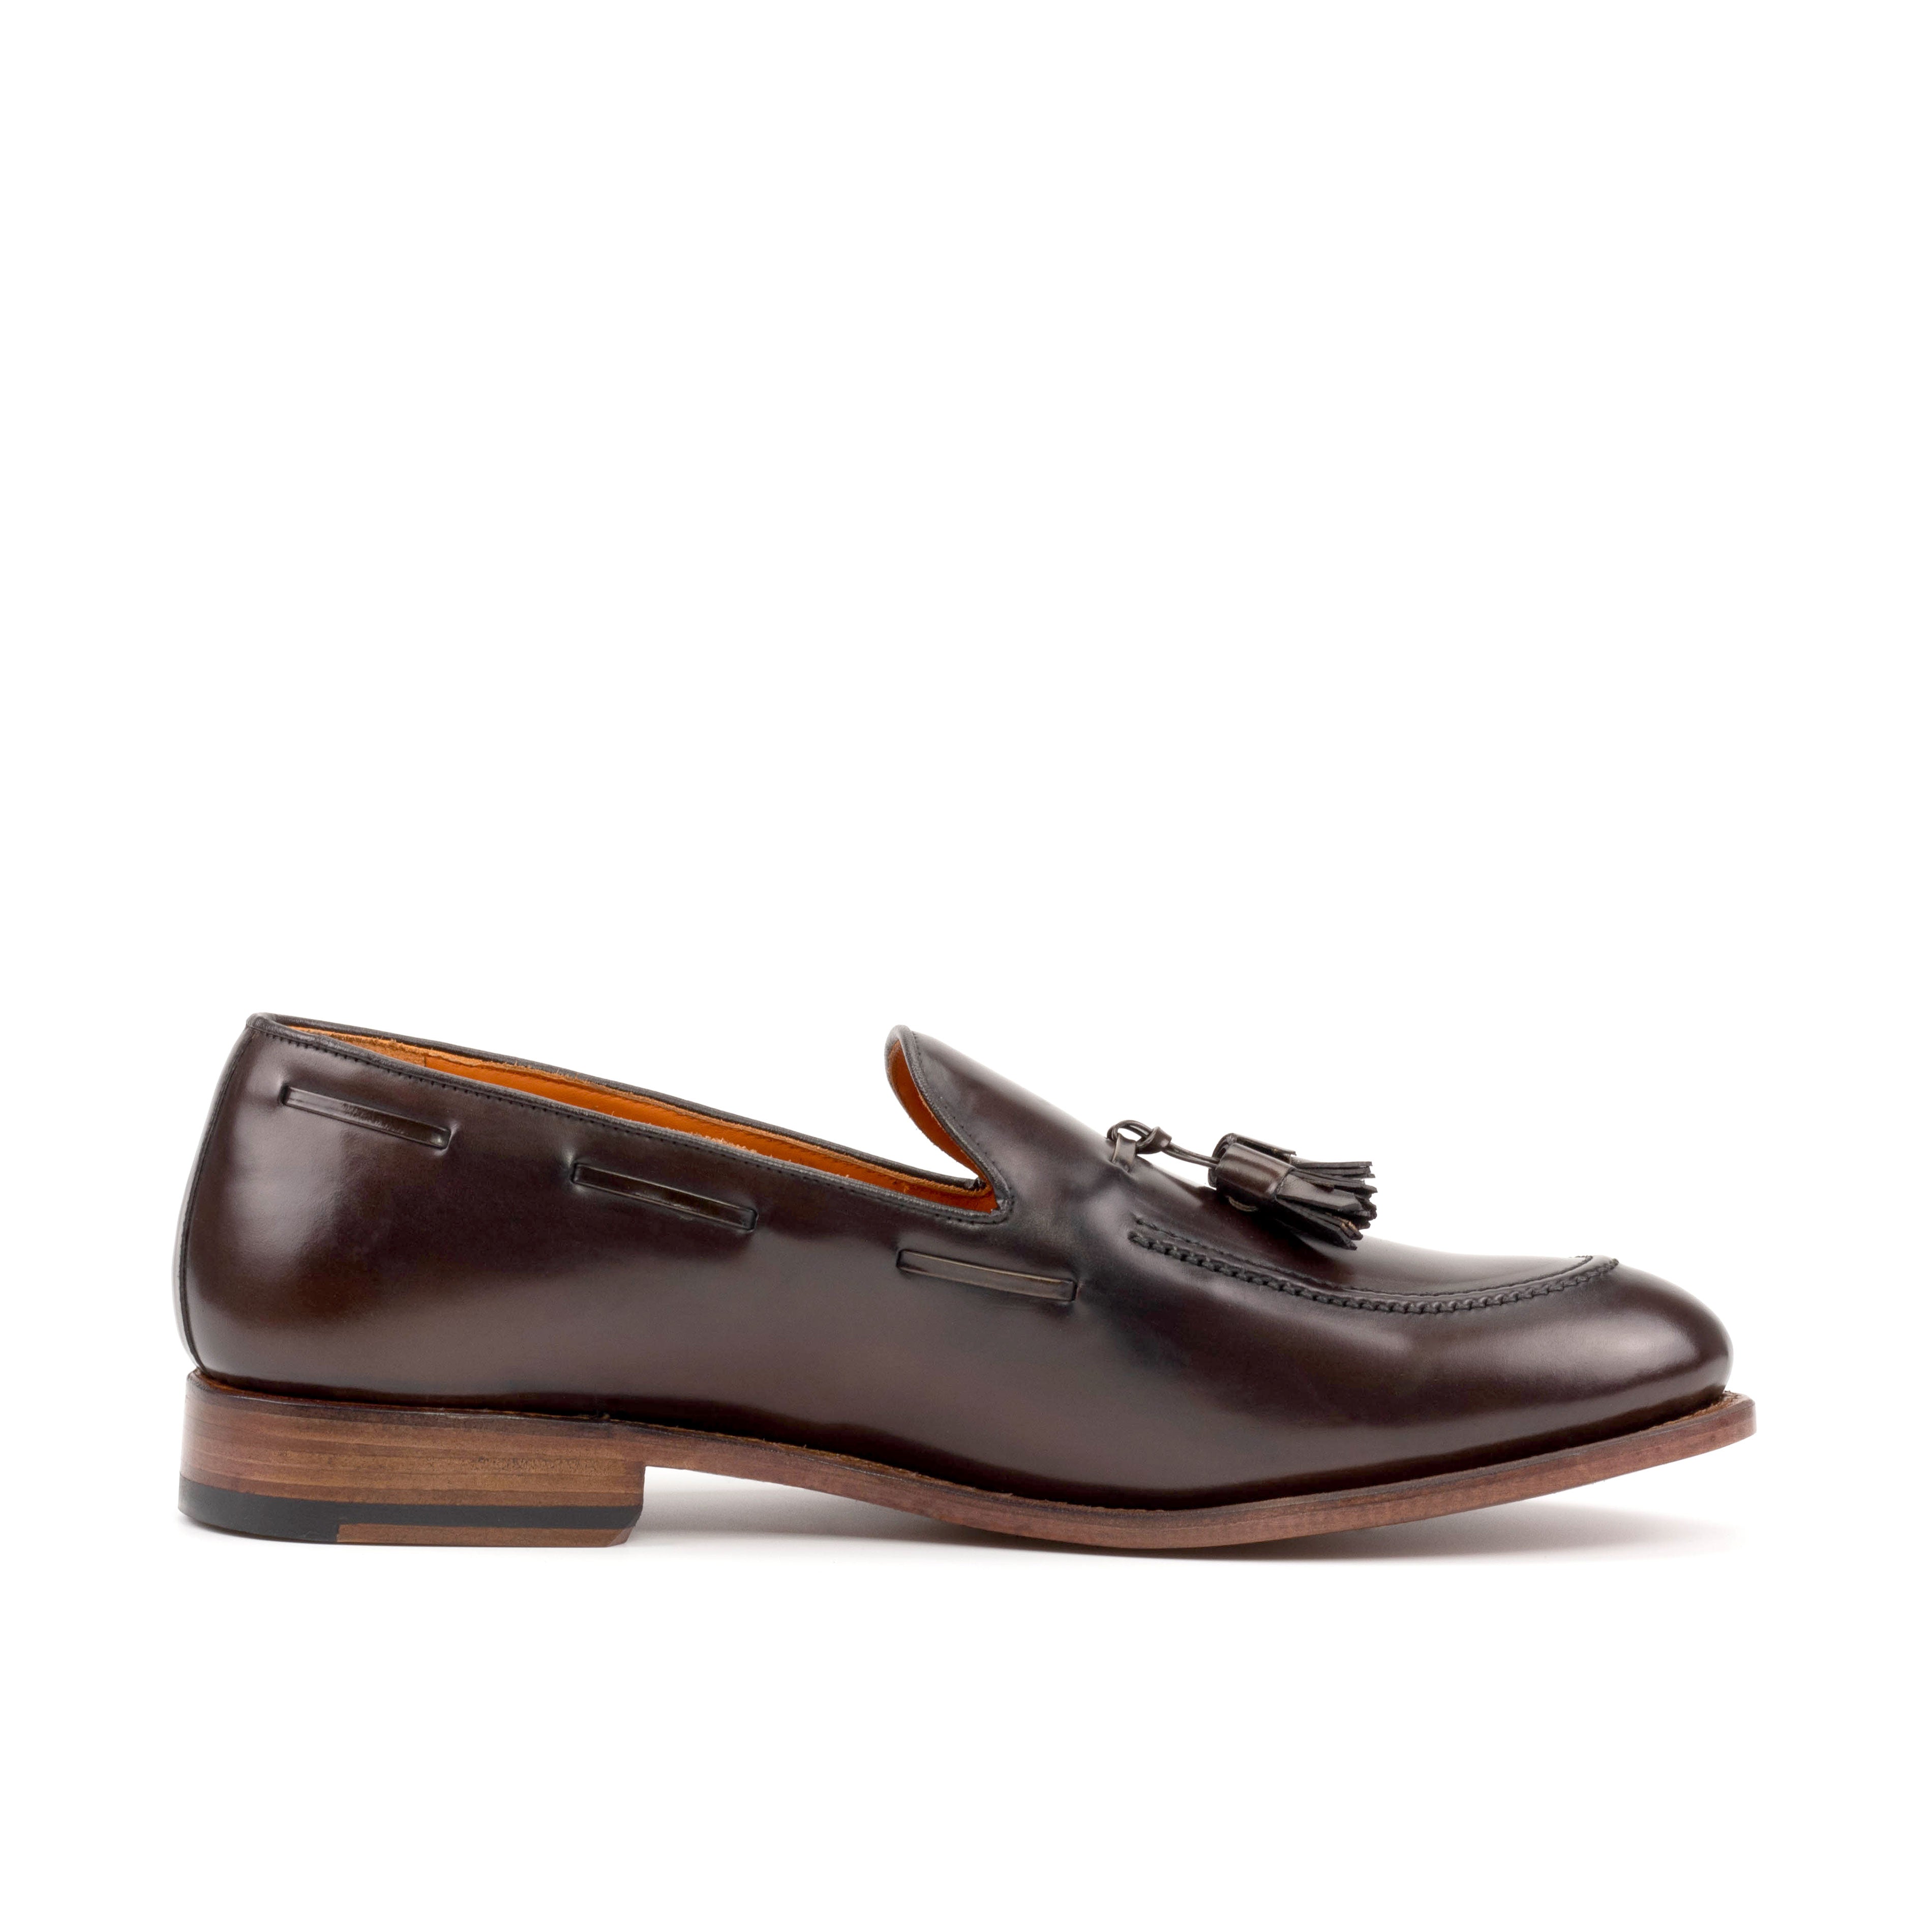 The Graduate Loafer (Shell Cordovan)